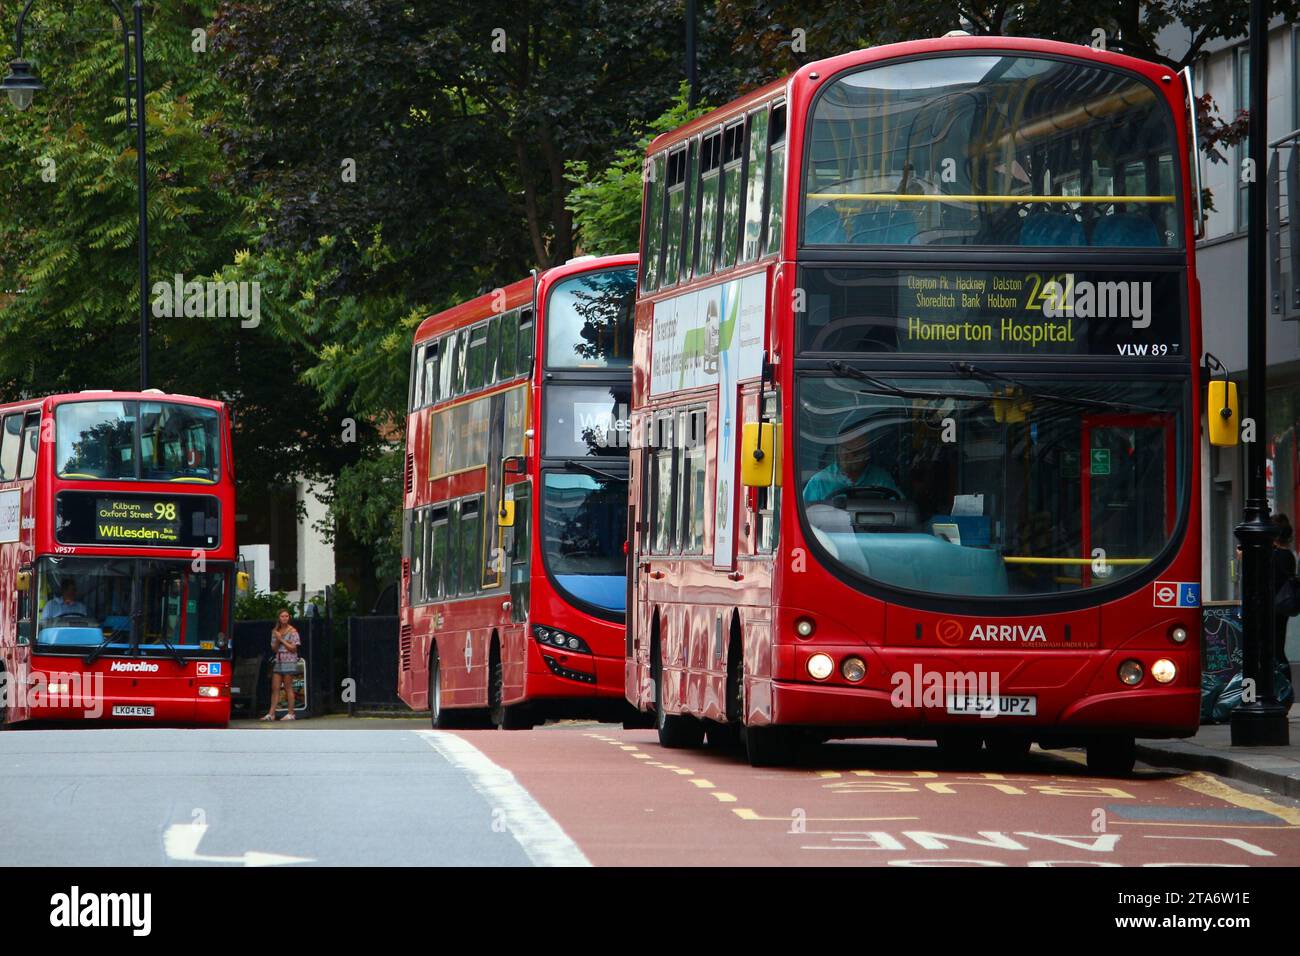 LONDON, UK - JULY 9, 2016: People ride a double decker bus at Holborn, London, UK. Transport for London (TFL) operates circa 8,500 buses on 670 routes Stock Photo